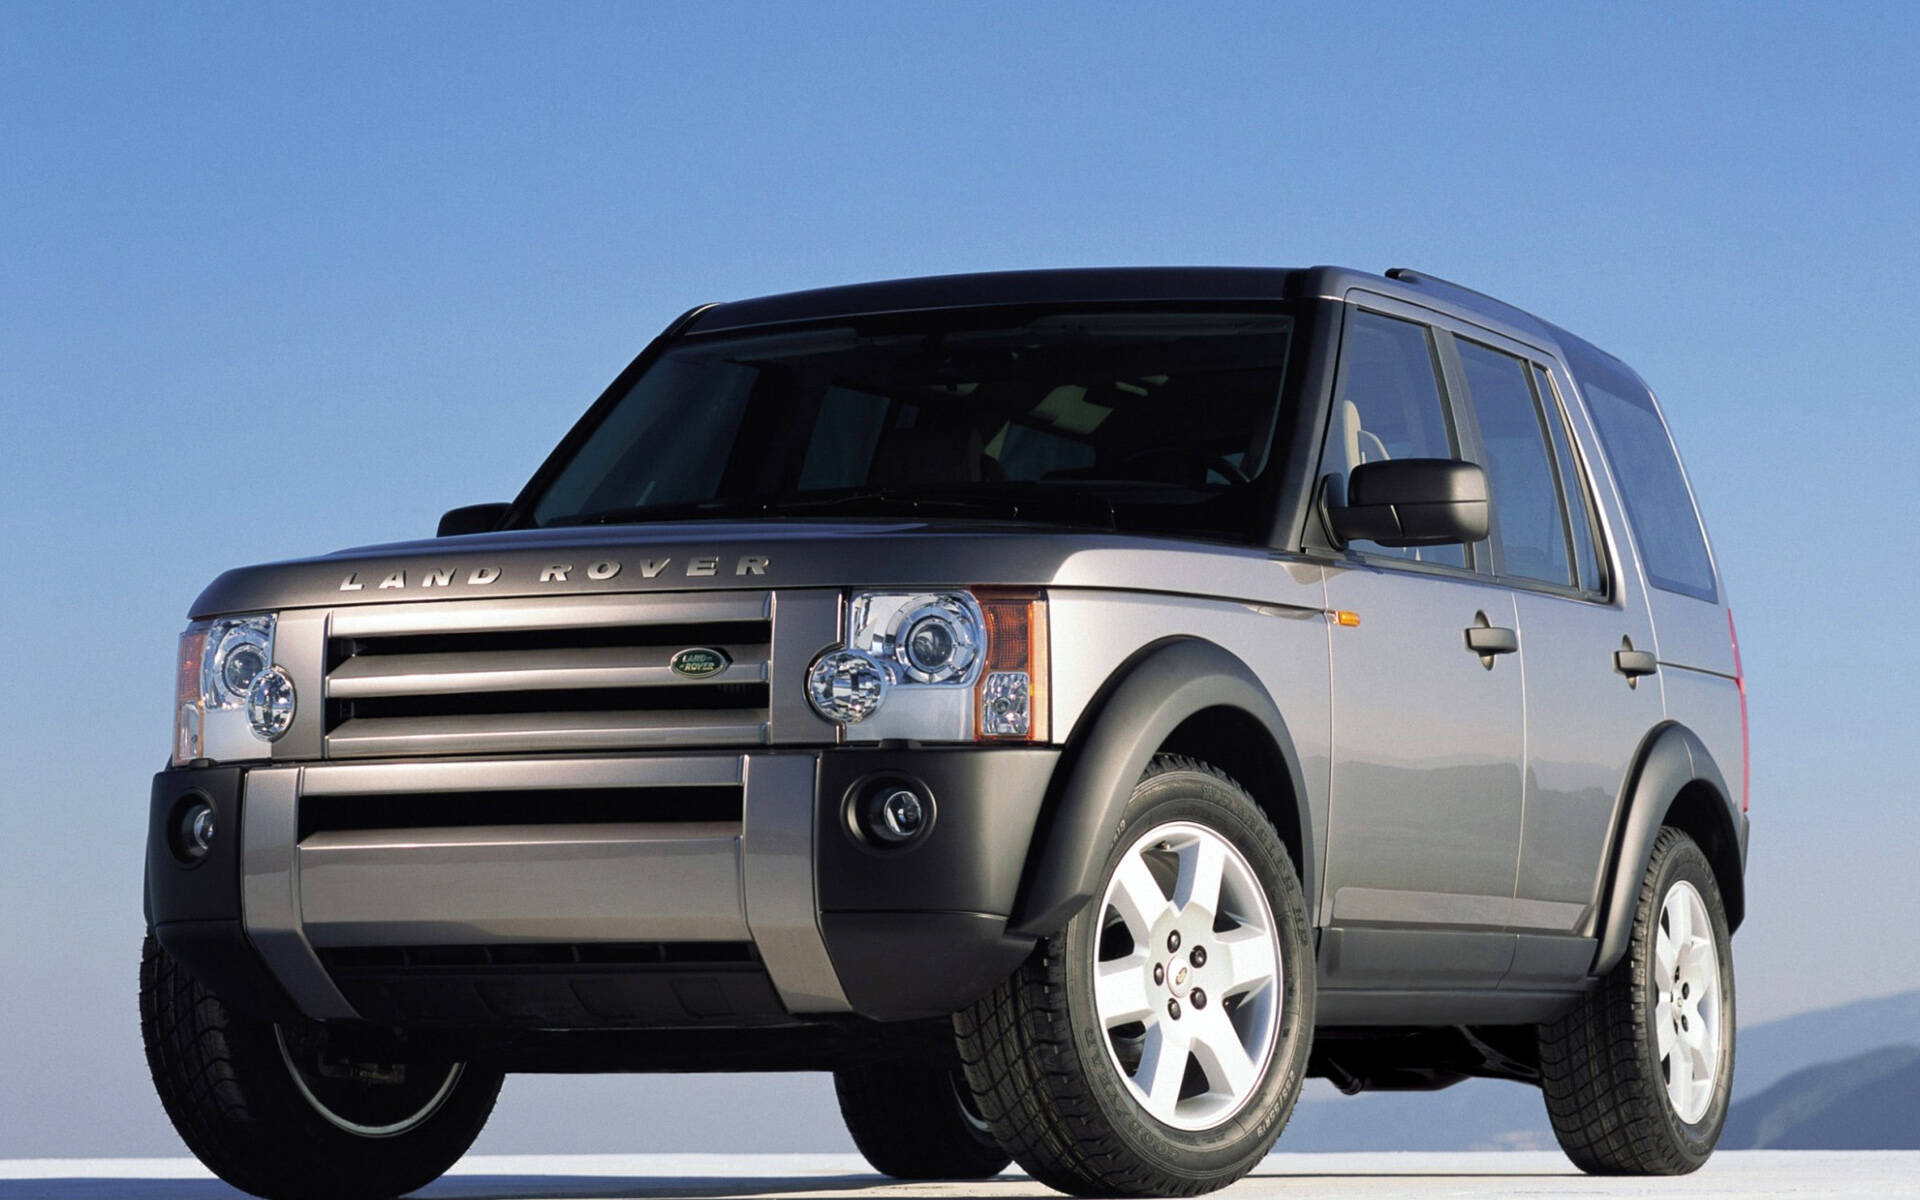 Land Rover LR2, LR3 or LR4: What's the Difference? | Otogo